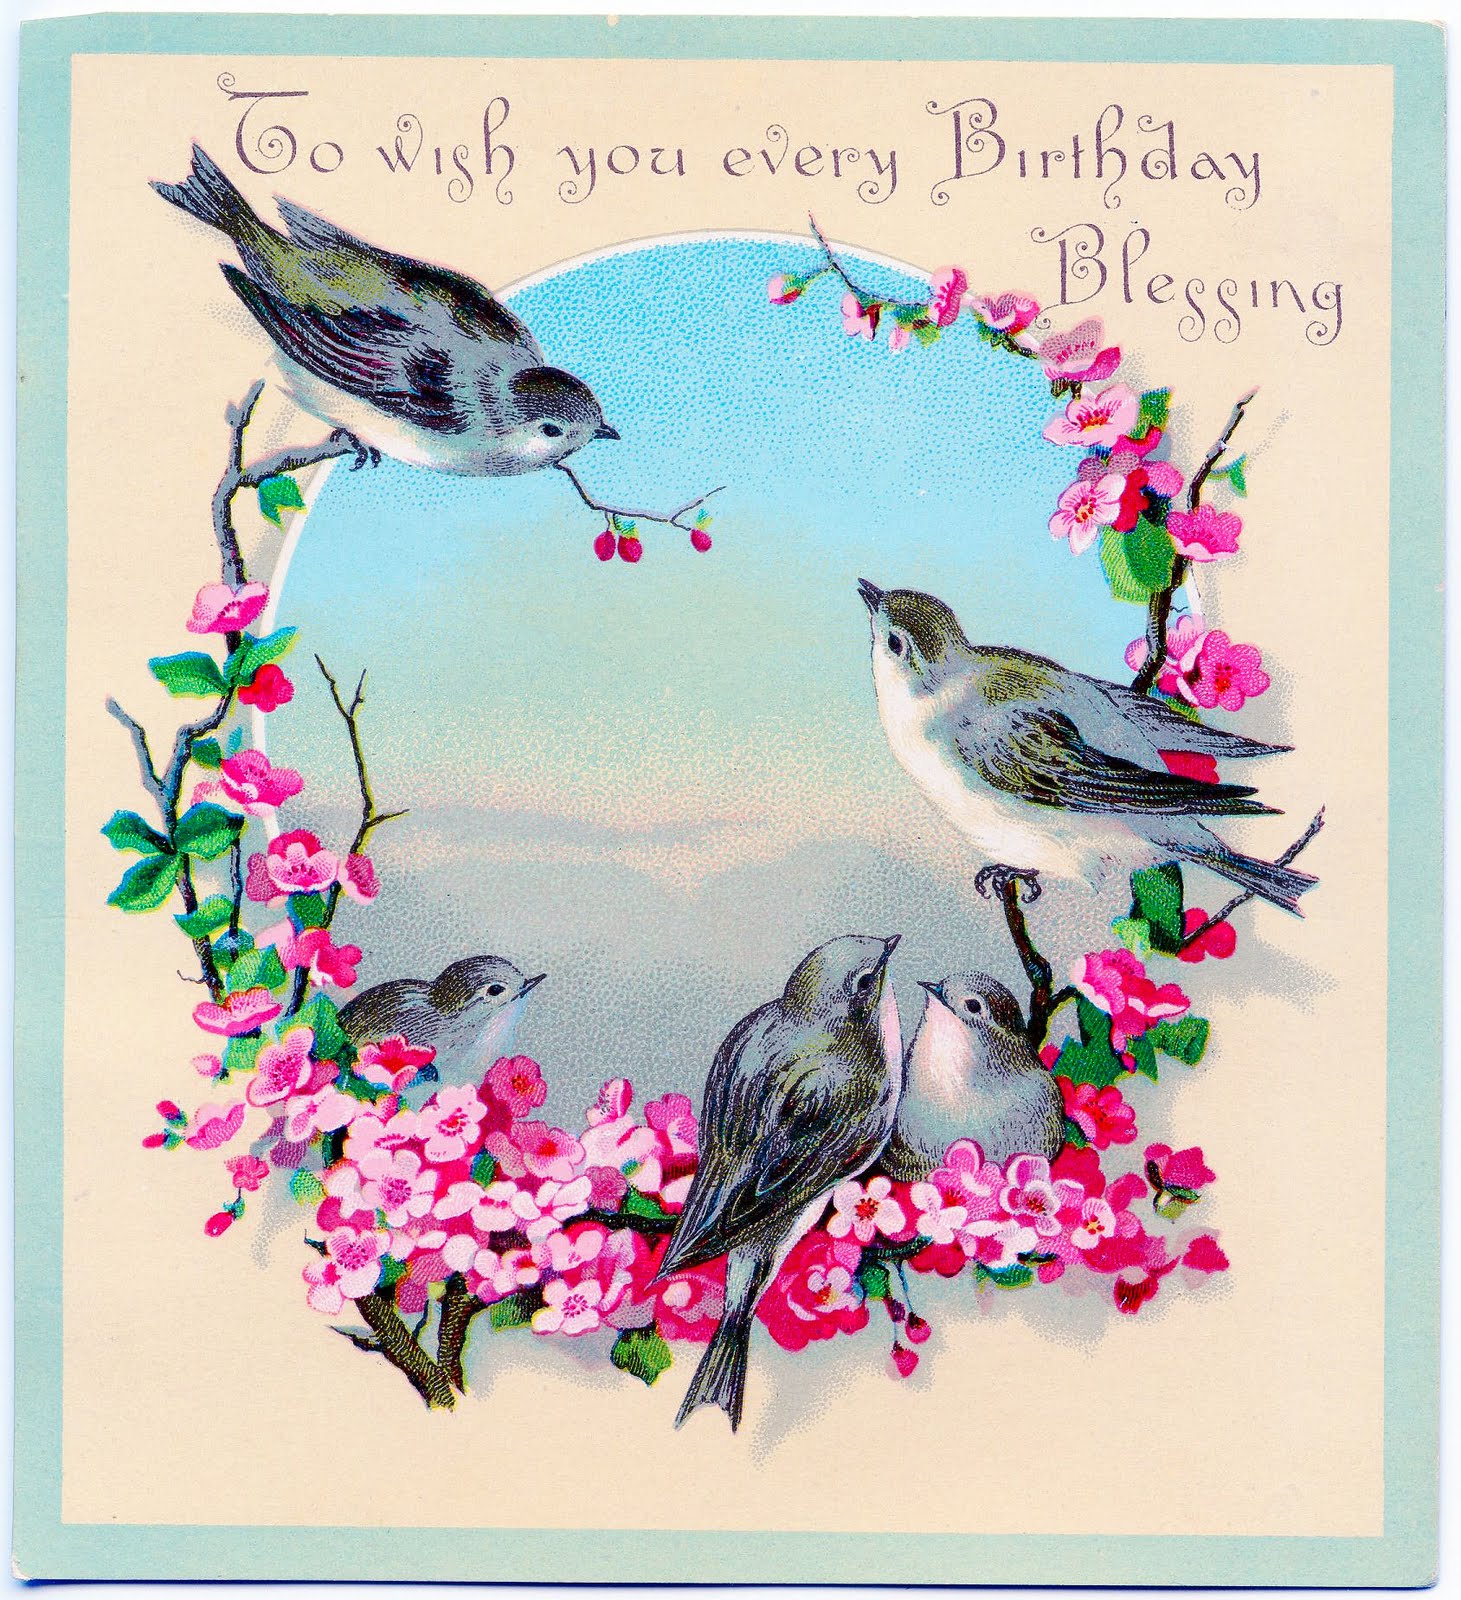 Sweet Birds With Flowers   Birthday Greeting   The Graphics Fairy